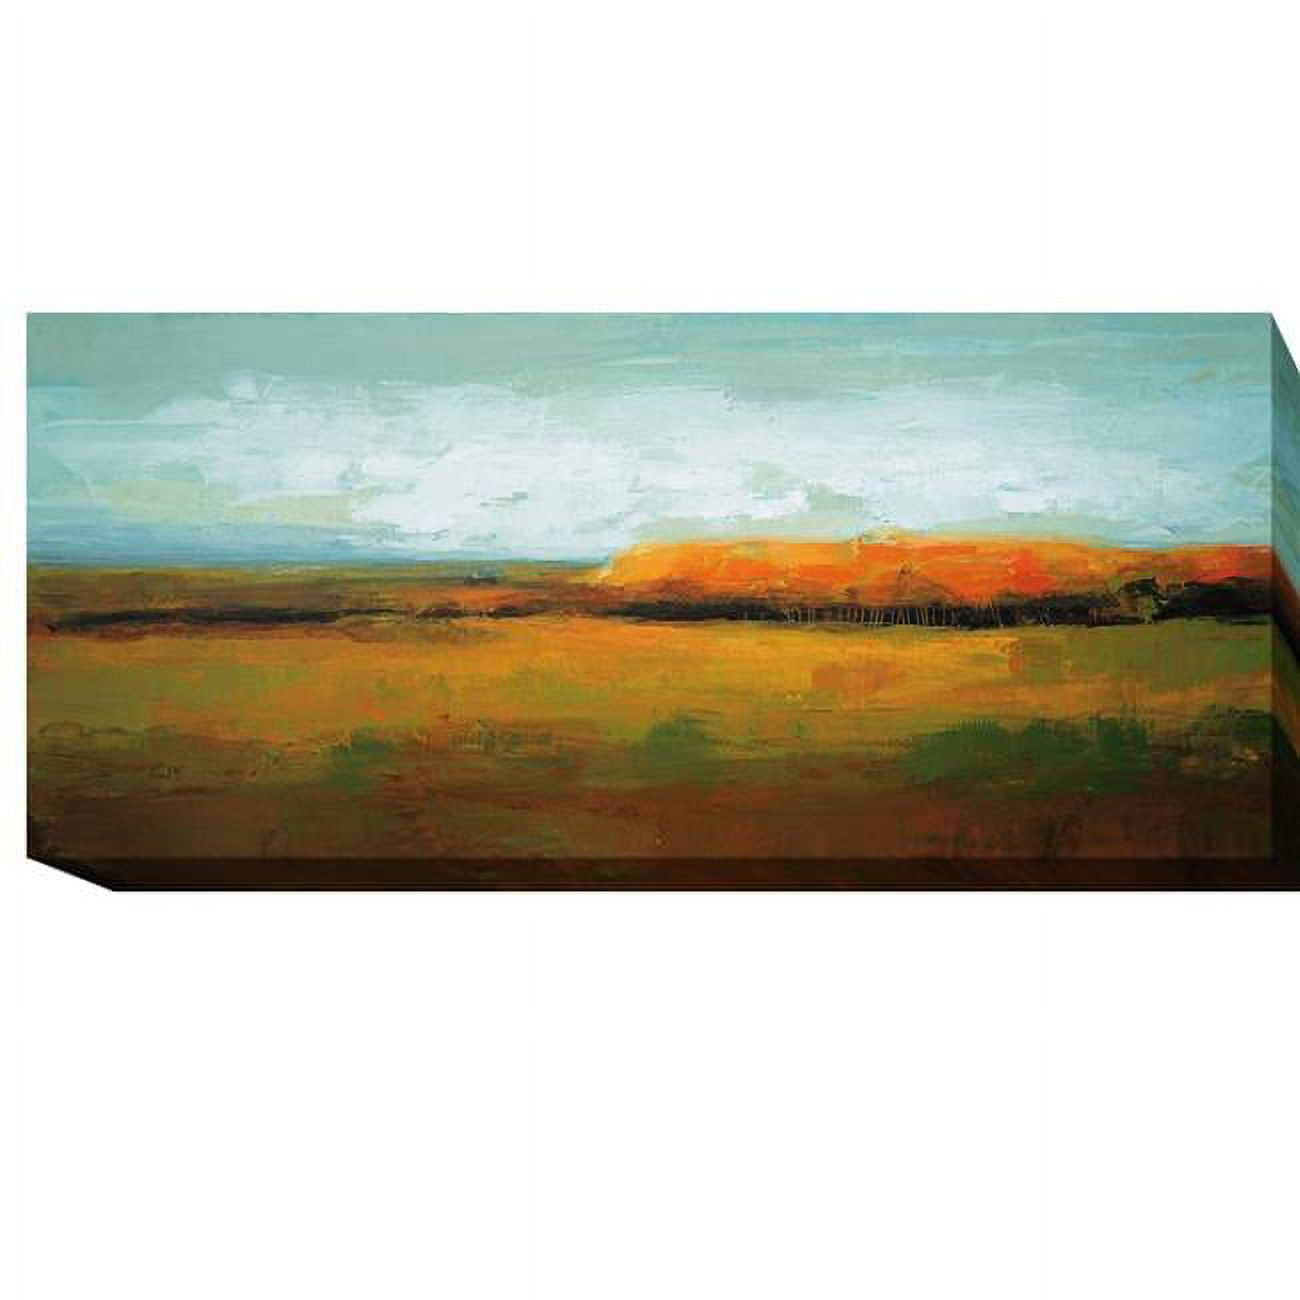 Drivescape By Peter Colbert Premium Gallery-wrapped Canvas Giclee Art - Ready To Hang, 12 X 24 X 1.5 In.